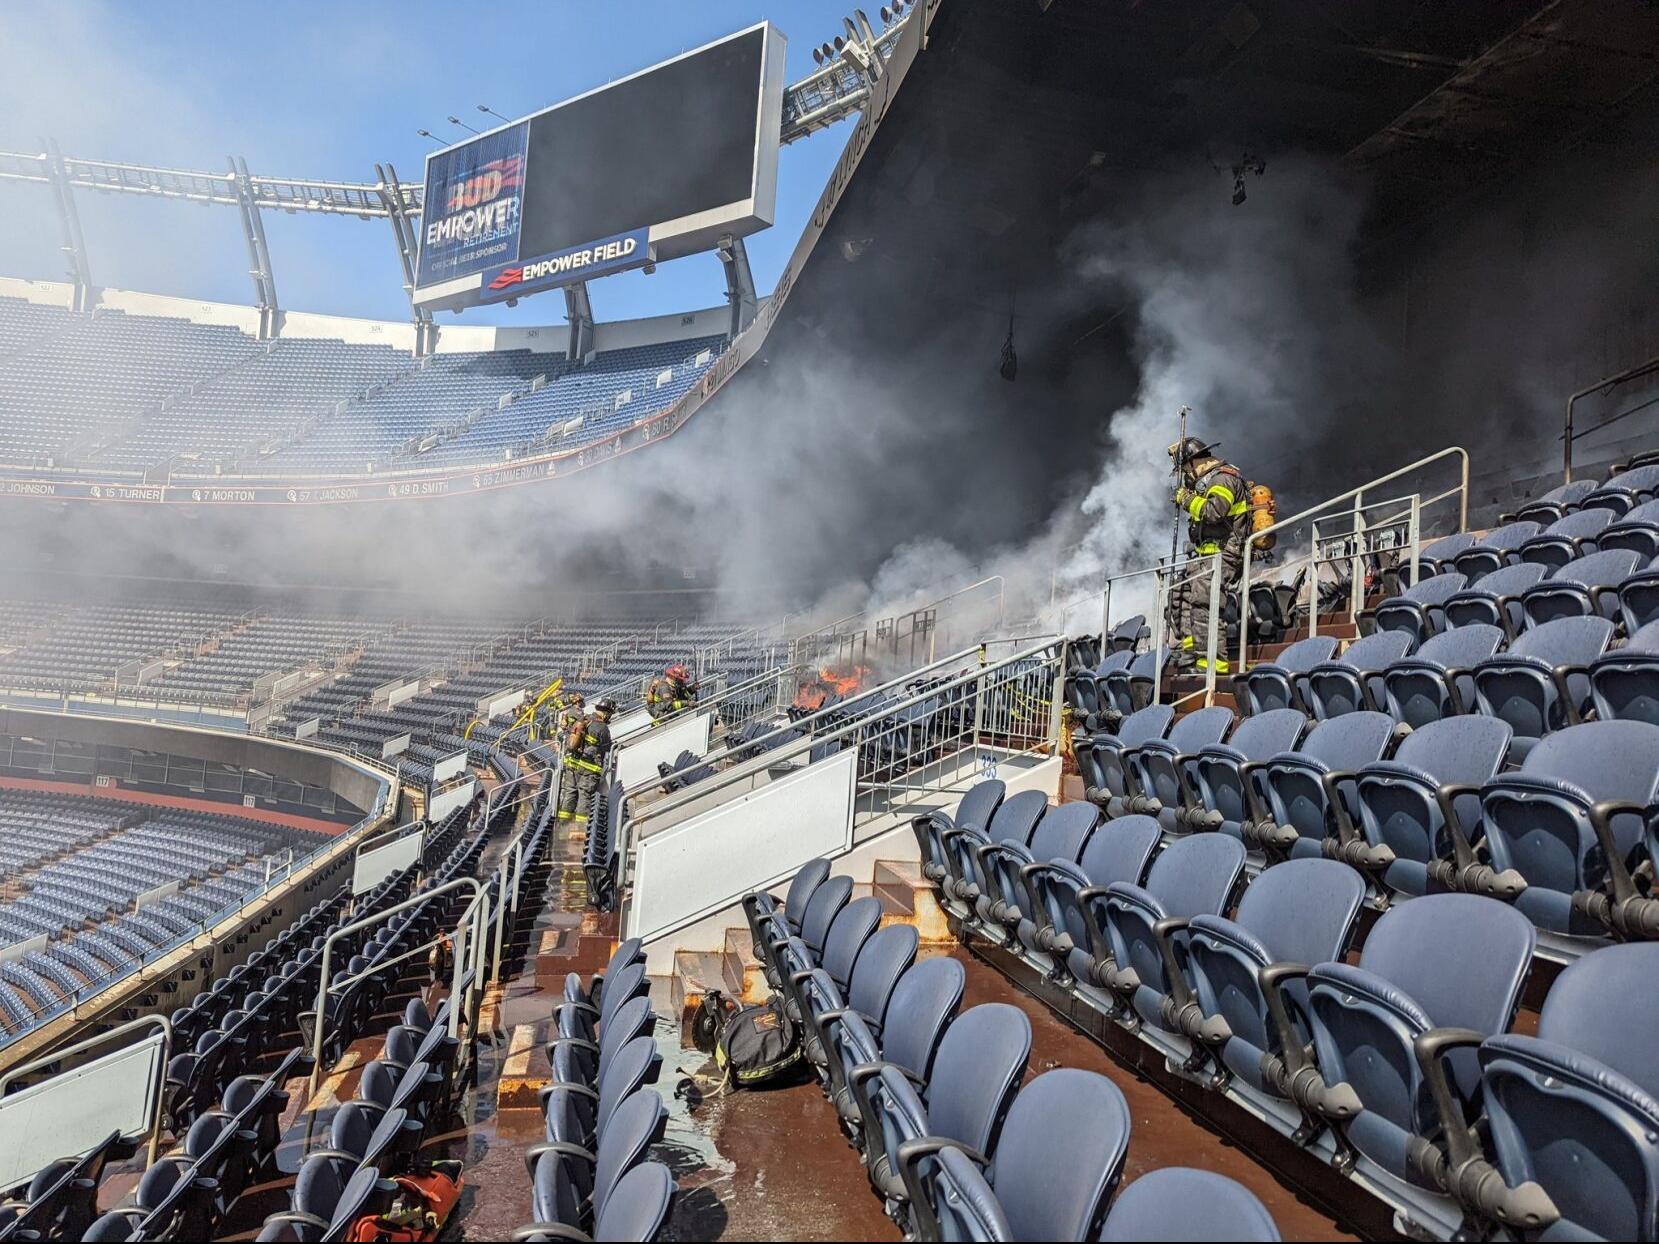 Here's what caused the fire at the Denver Broncos' stadium